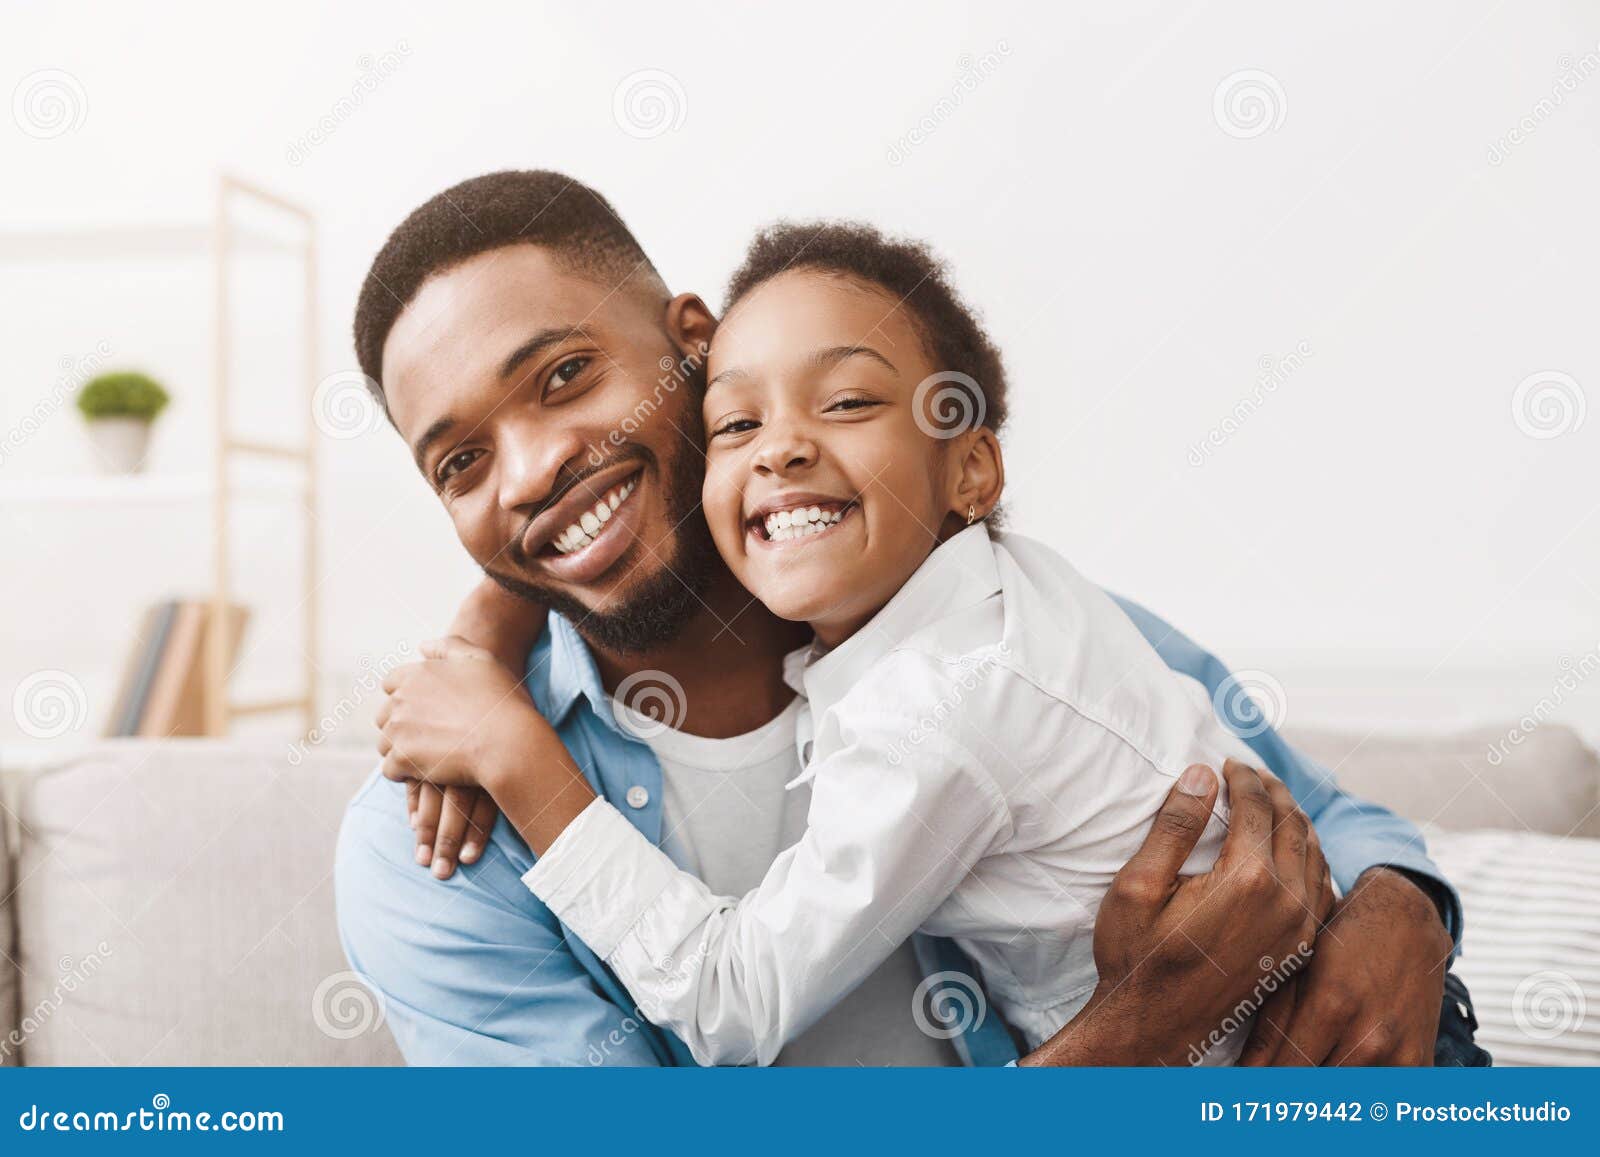 fatherhood concept. lovely father and daughter embracing